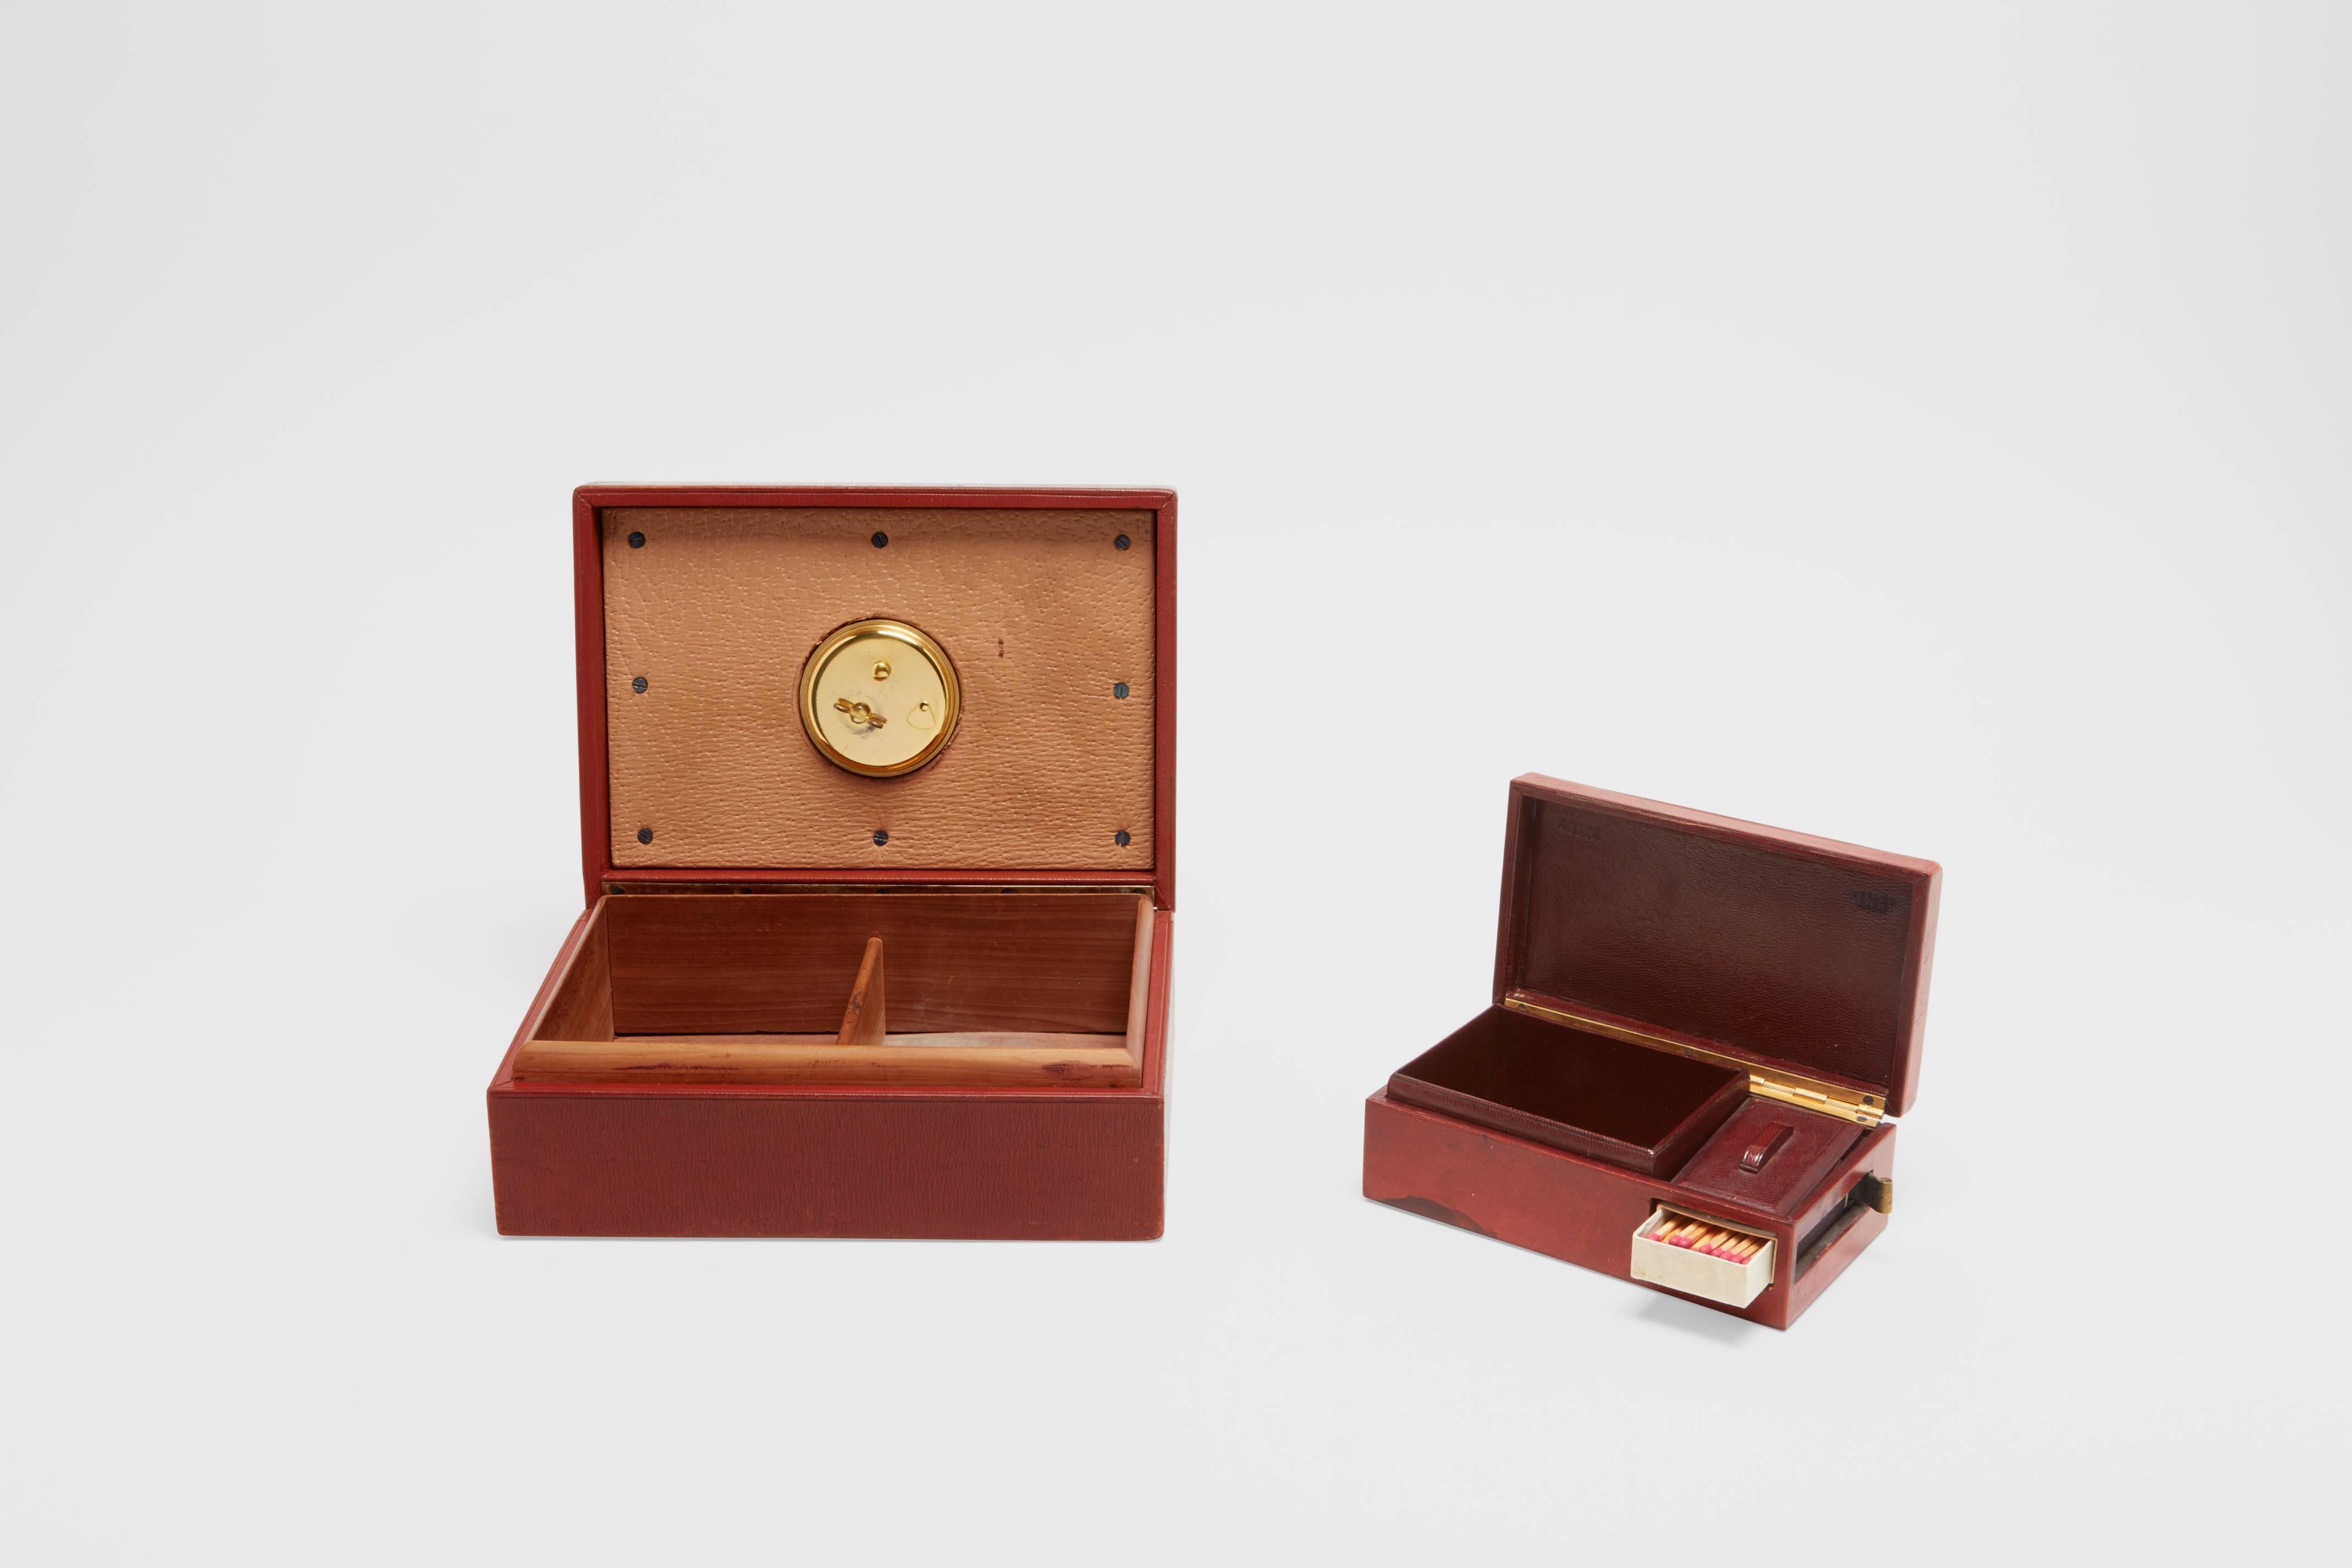 A wood leather covered cigar box with a fully working clock in the lid, along with an accompanying wood leather covered cigarette box with enclosed match box with striking area to the side. This is an exceptional and very rare set by two of the most